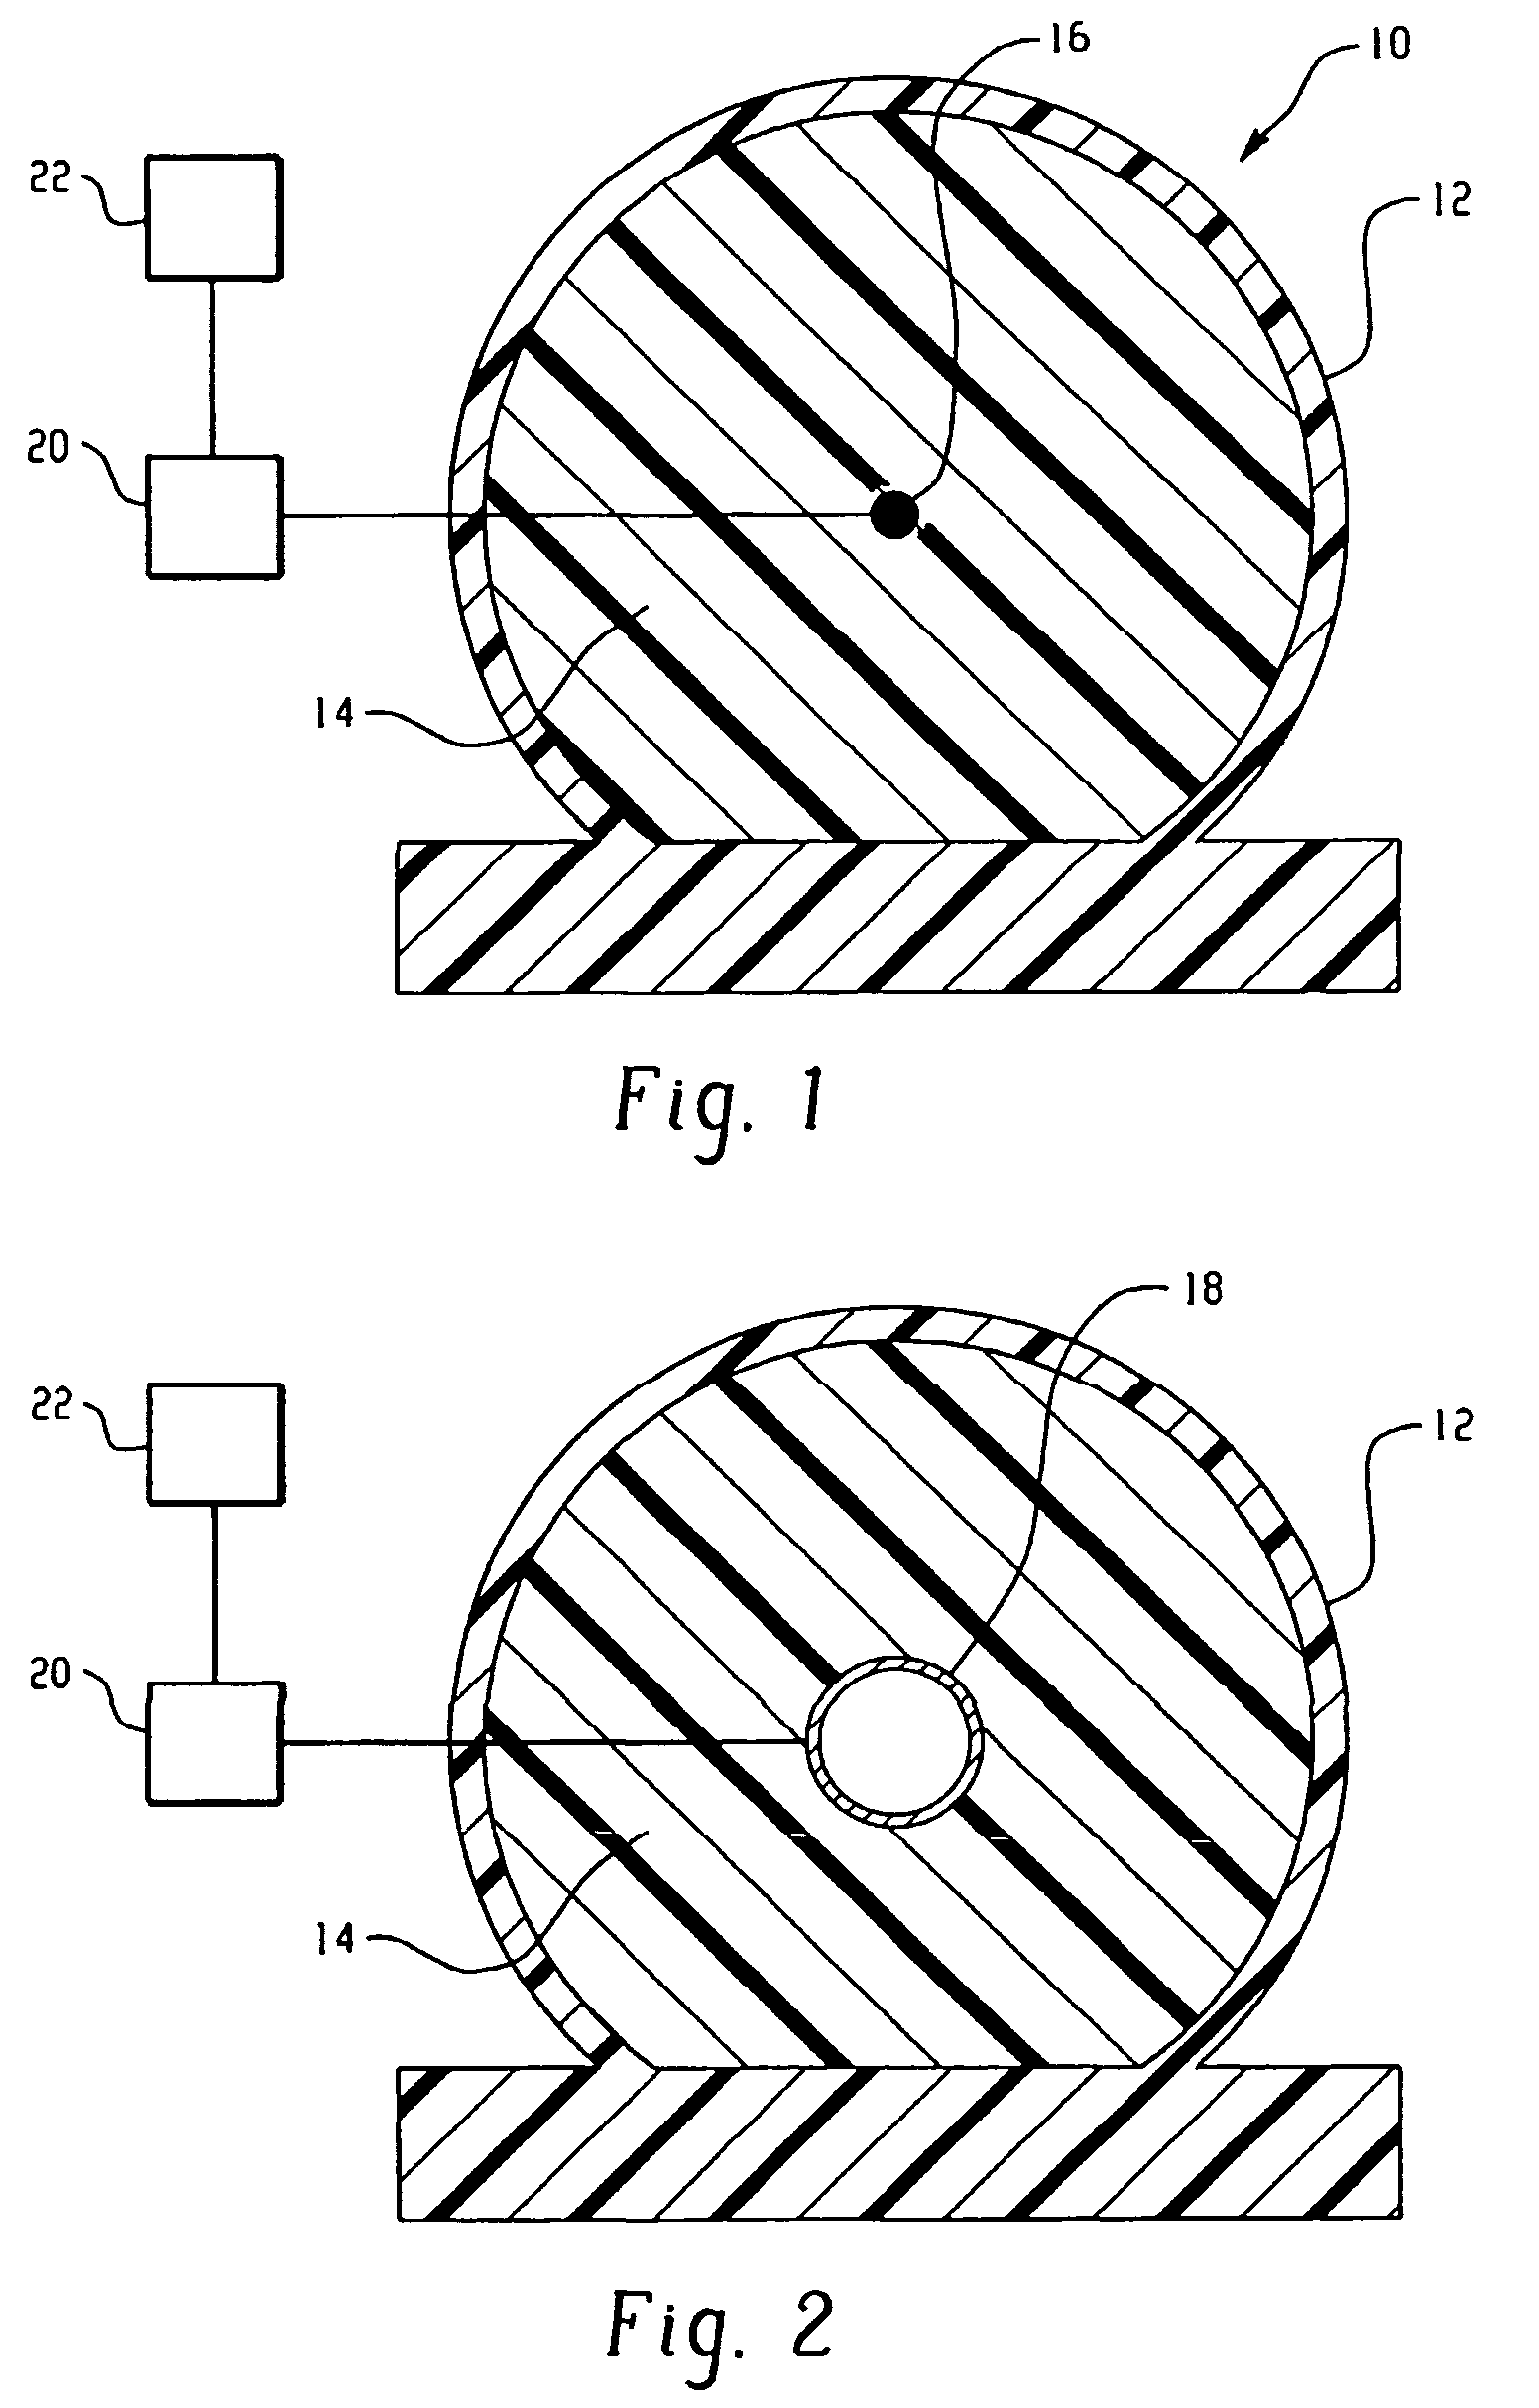 Reversible thermally expandable and/or contractible seal assemblies